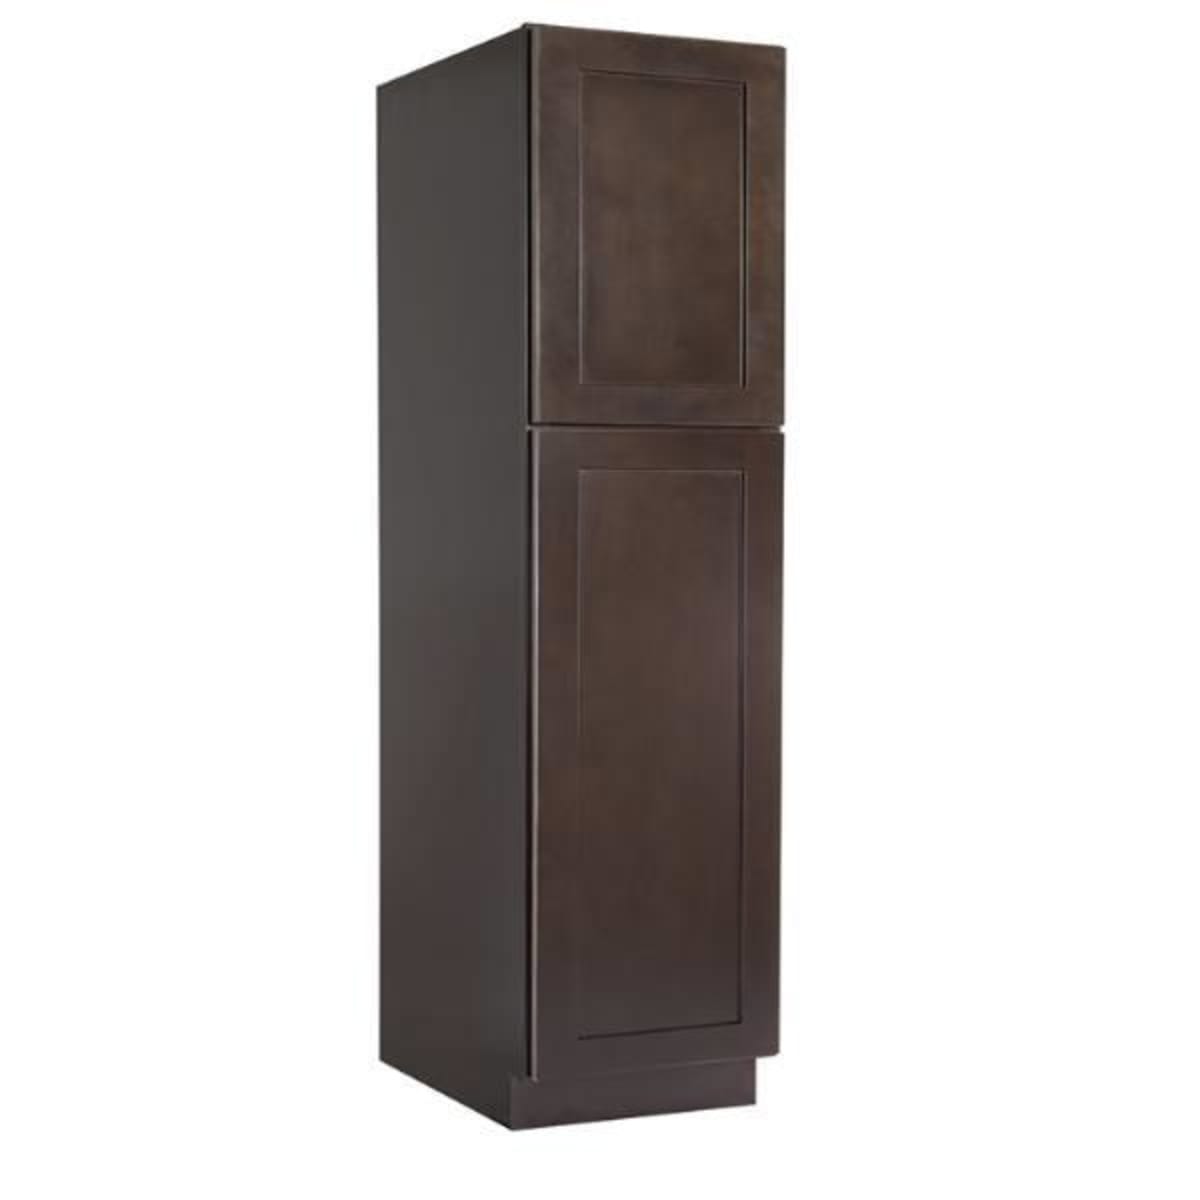 Design House Assembled 18x90x24 In Shaker Style 2 Door Pantry